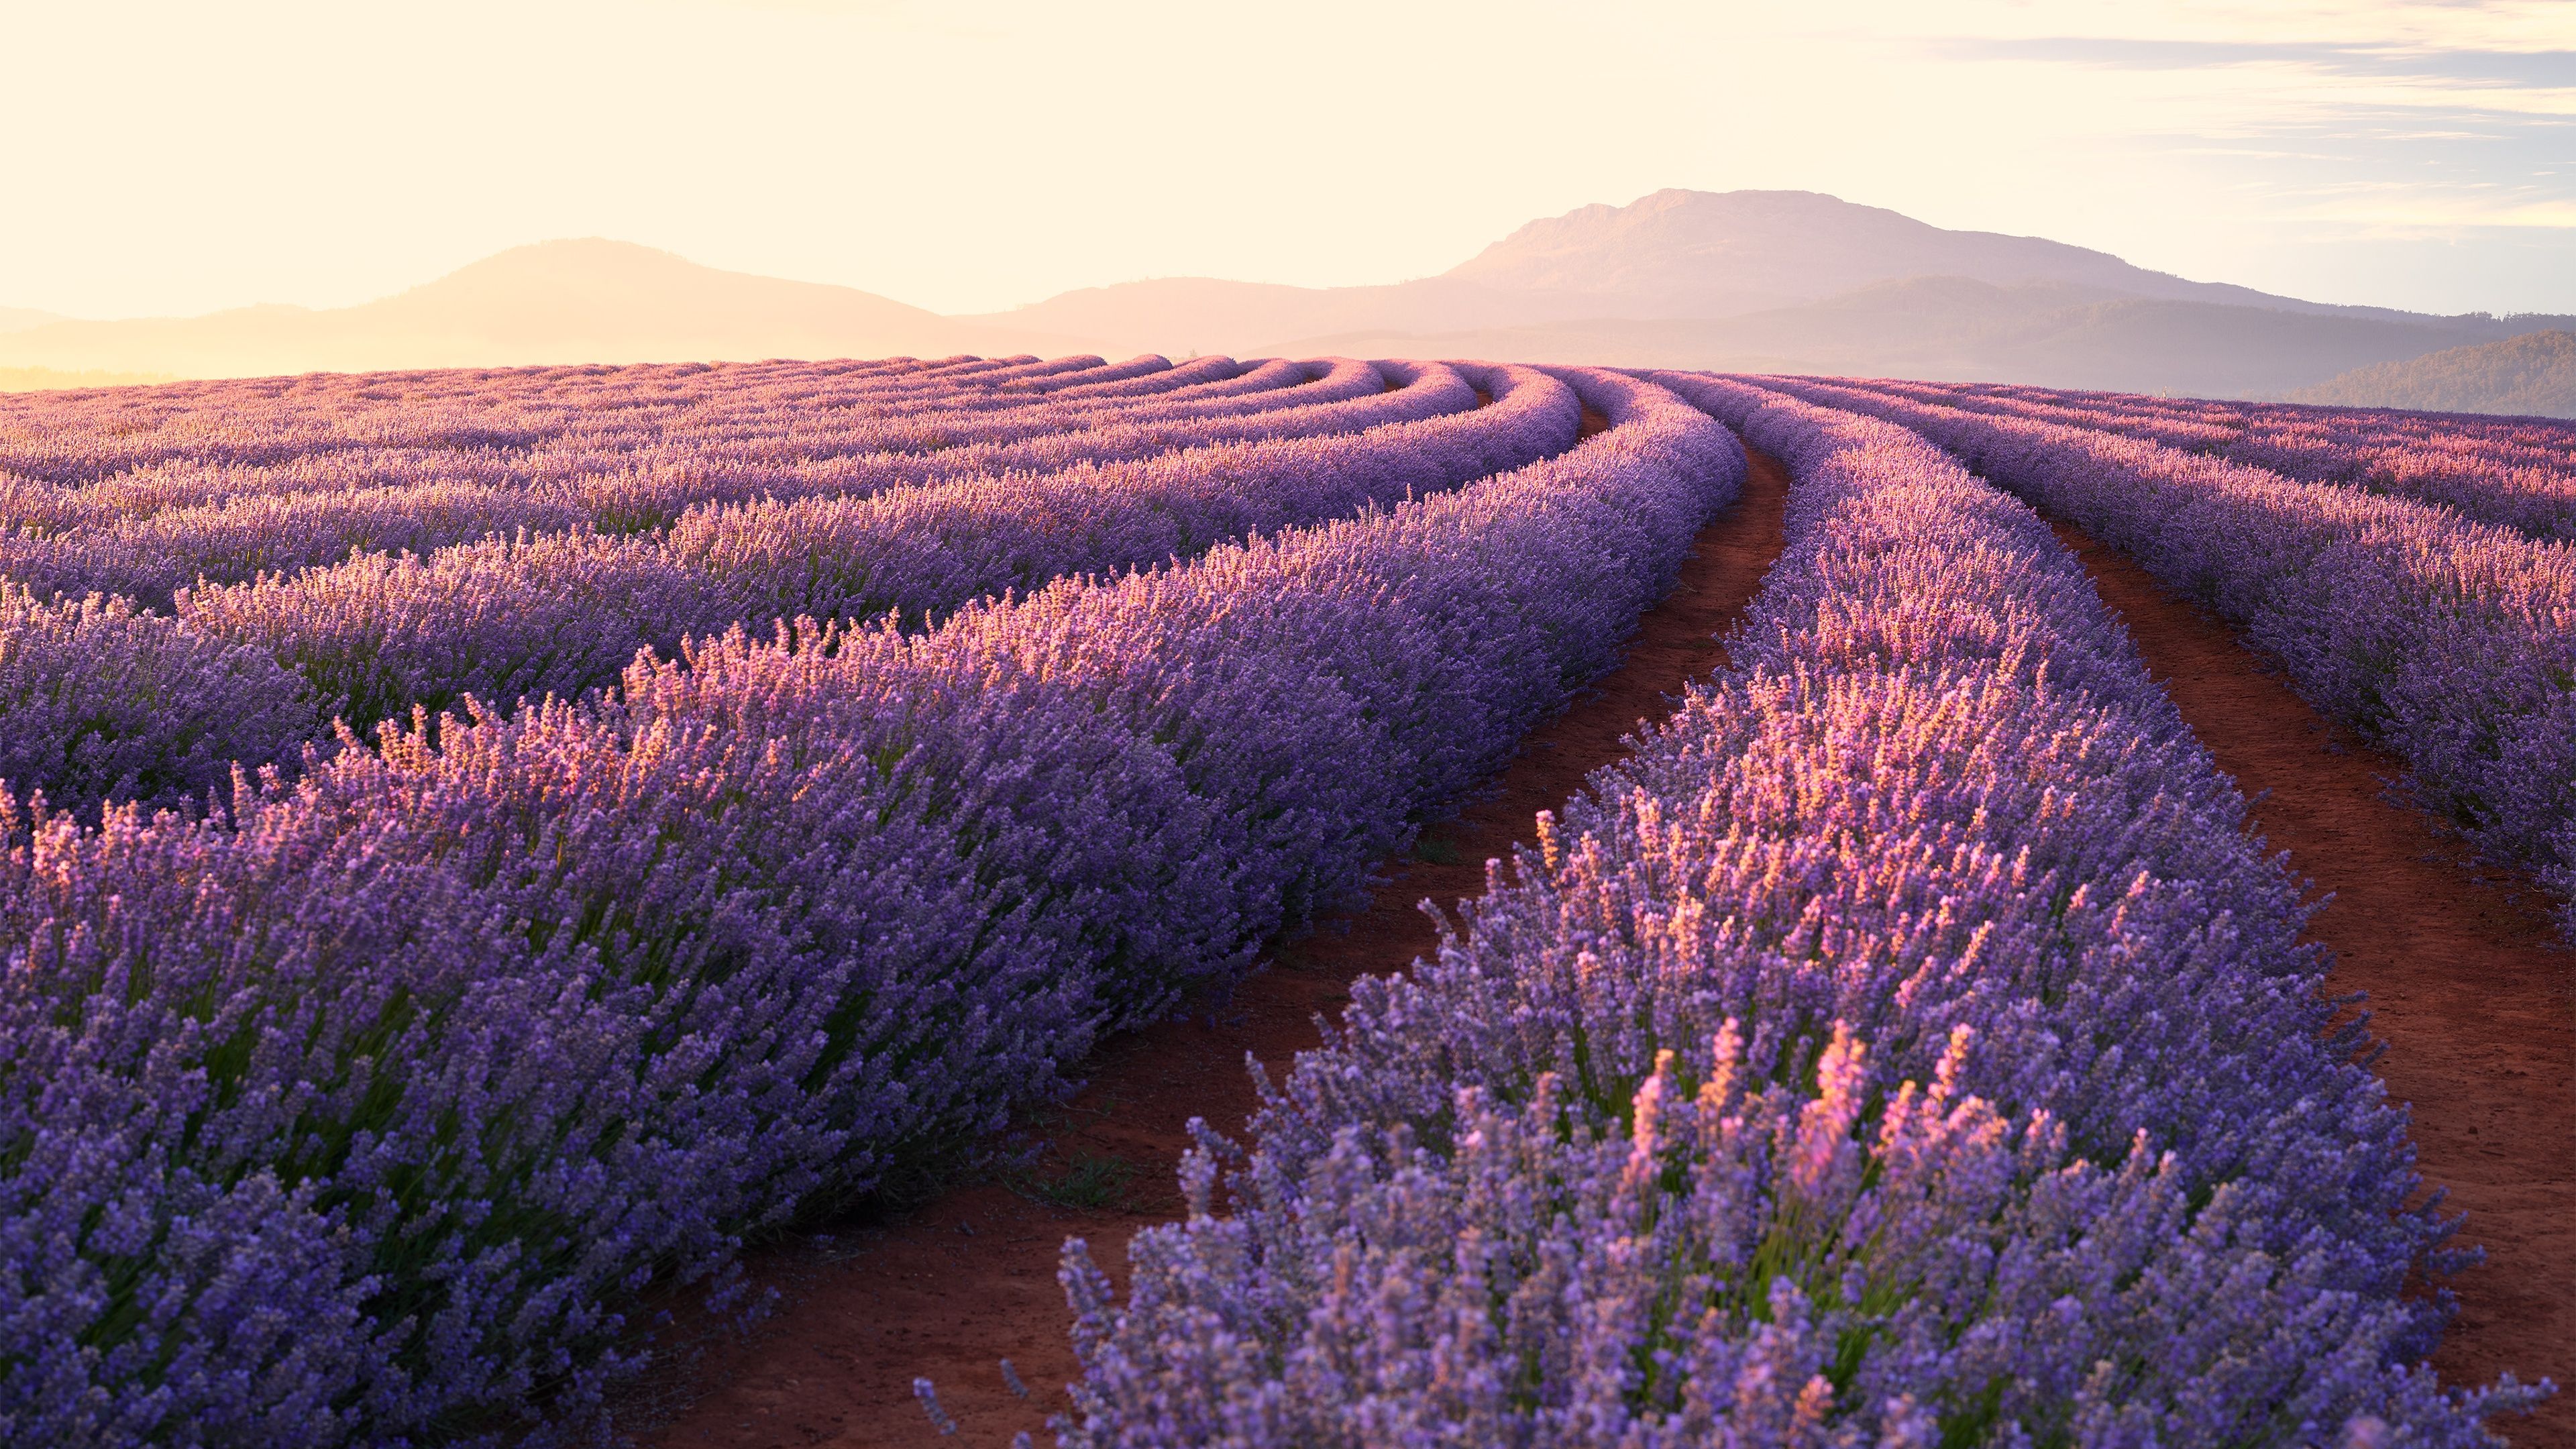 A lavender field with a dirt path in the middle and mountains in the background. - Farm